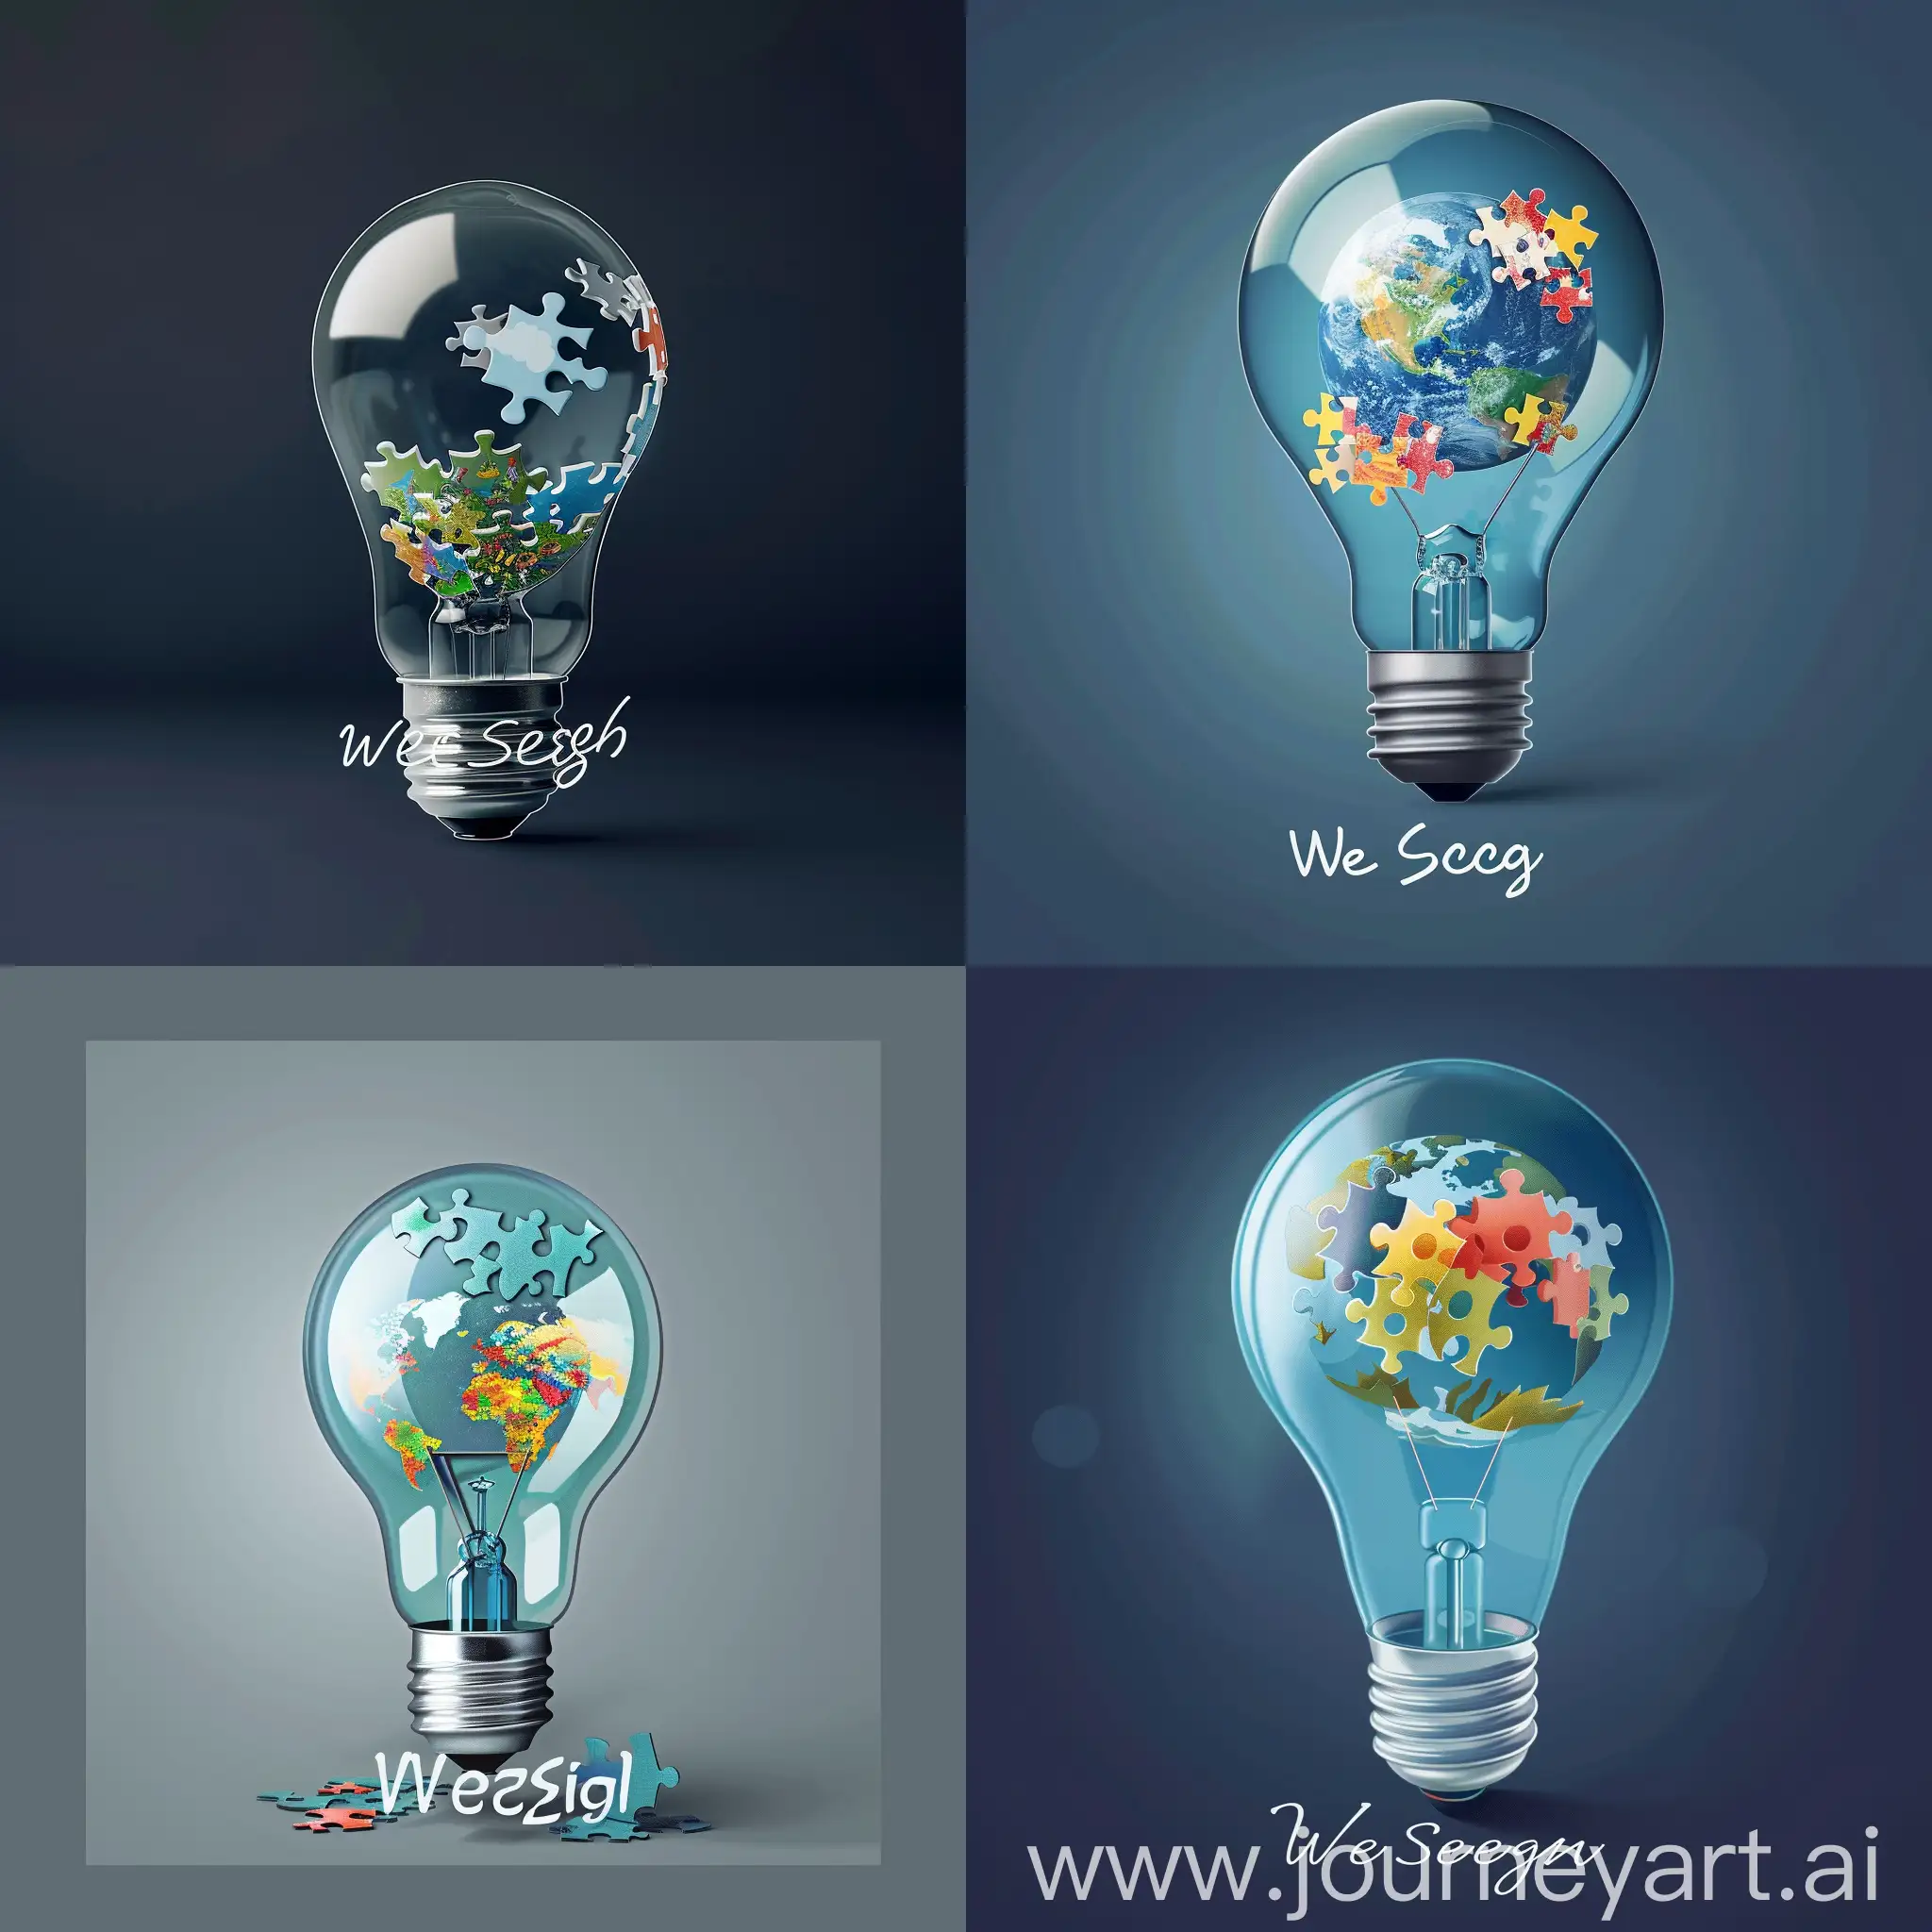 Global-Illumination-WeSearch-Concept-in-Puzzle-Lightbulb